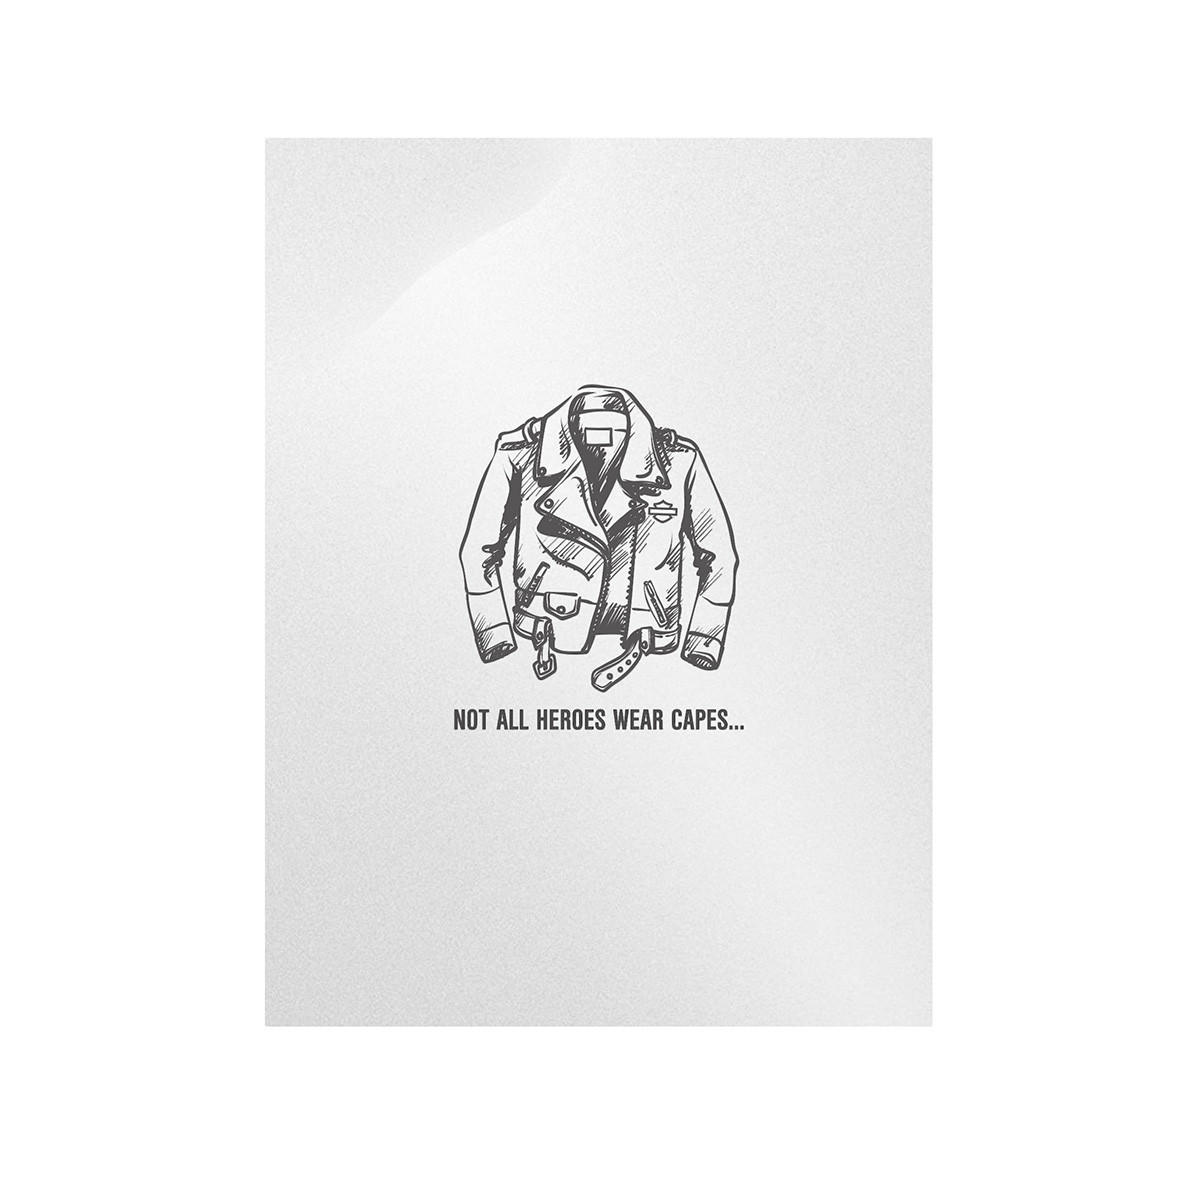 HARLEY DAVIDSON NOT ALL HEROES WEAR CAPES - FATHER'S DAY CARD